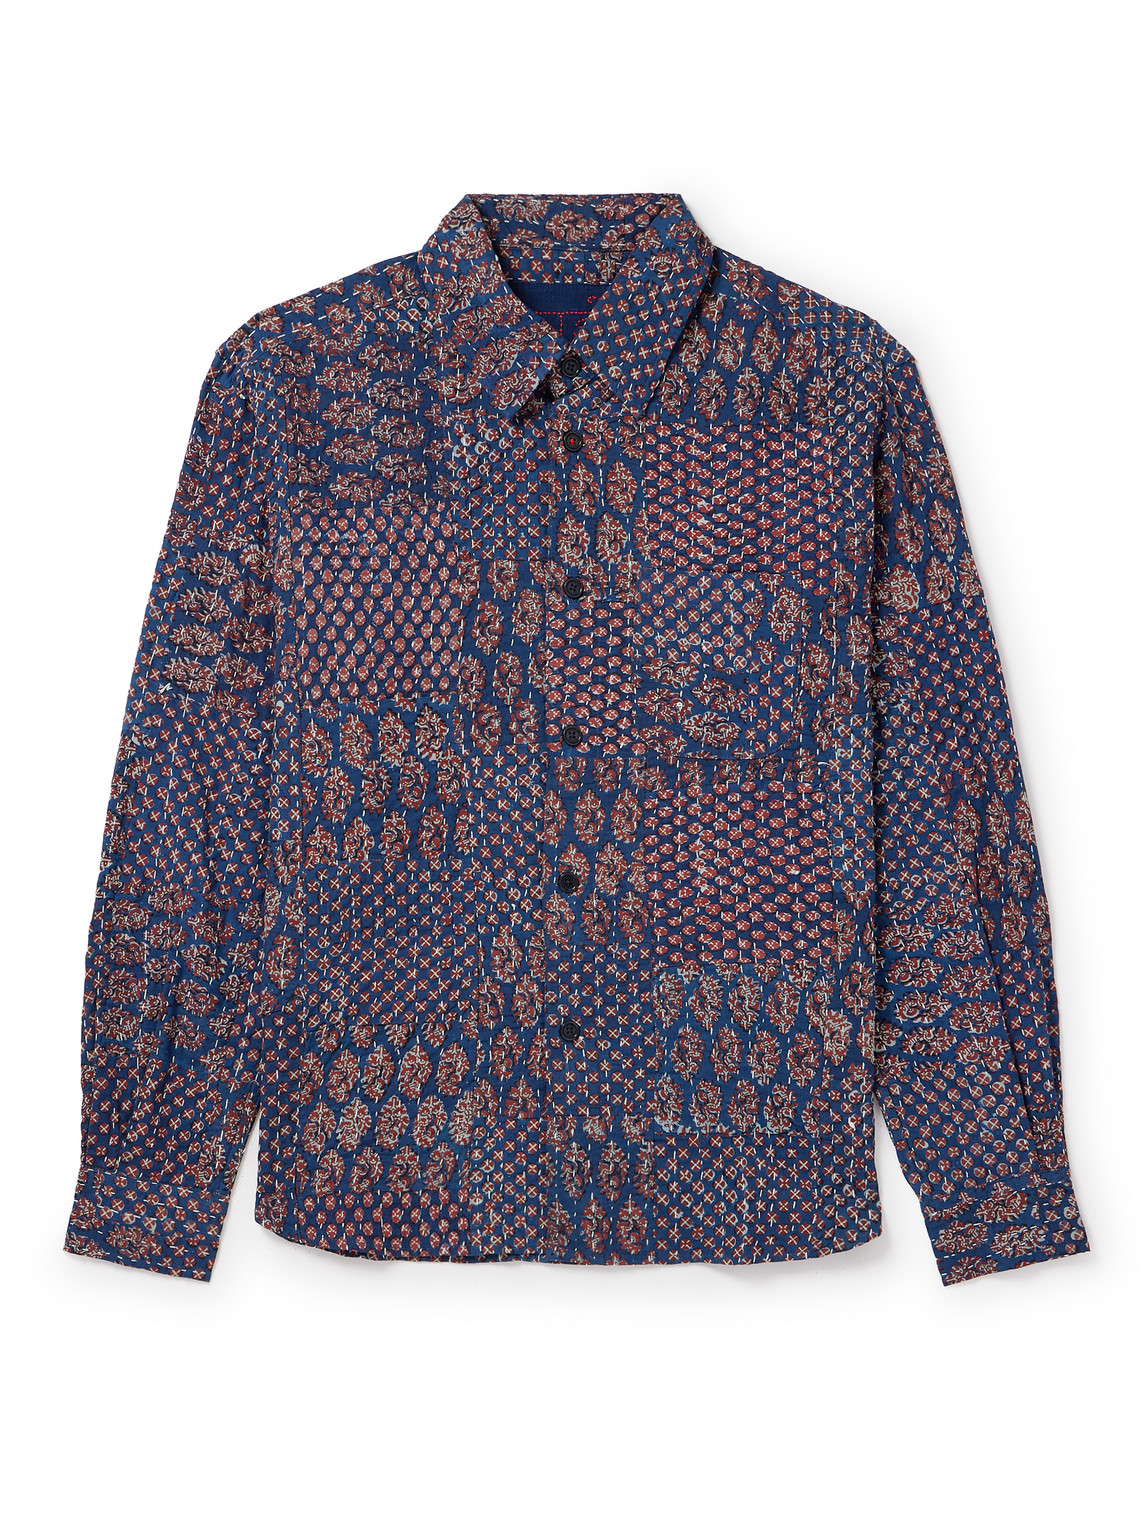 Luis Printed Embroidered Cotton Shirt